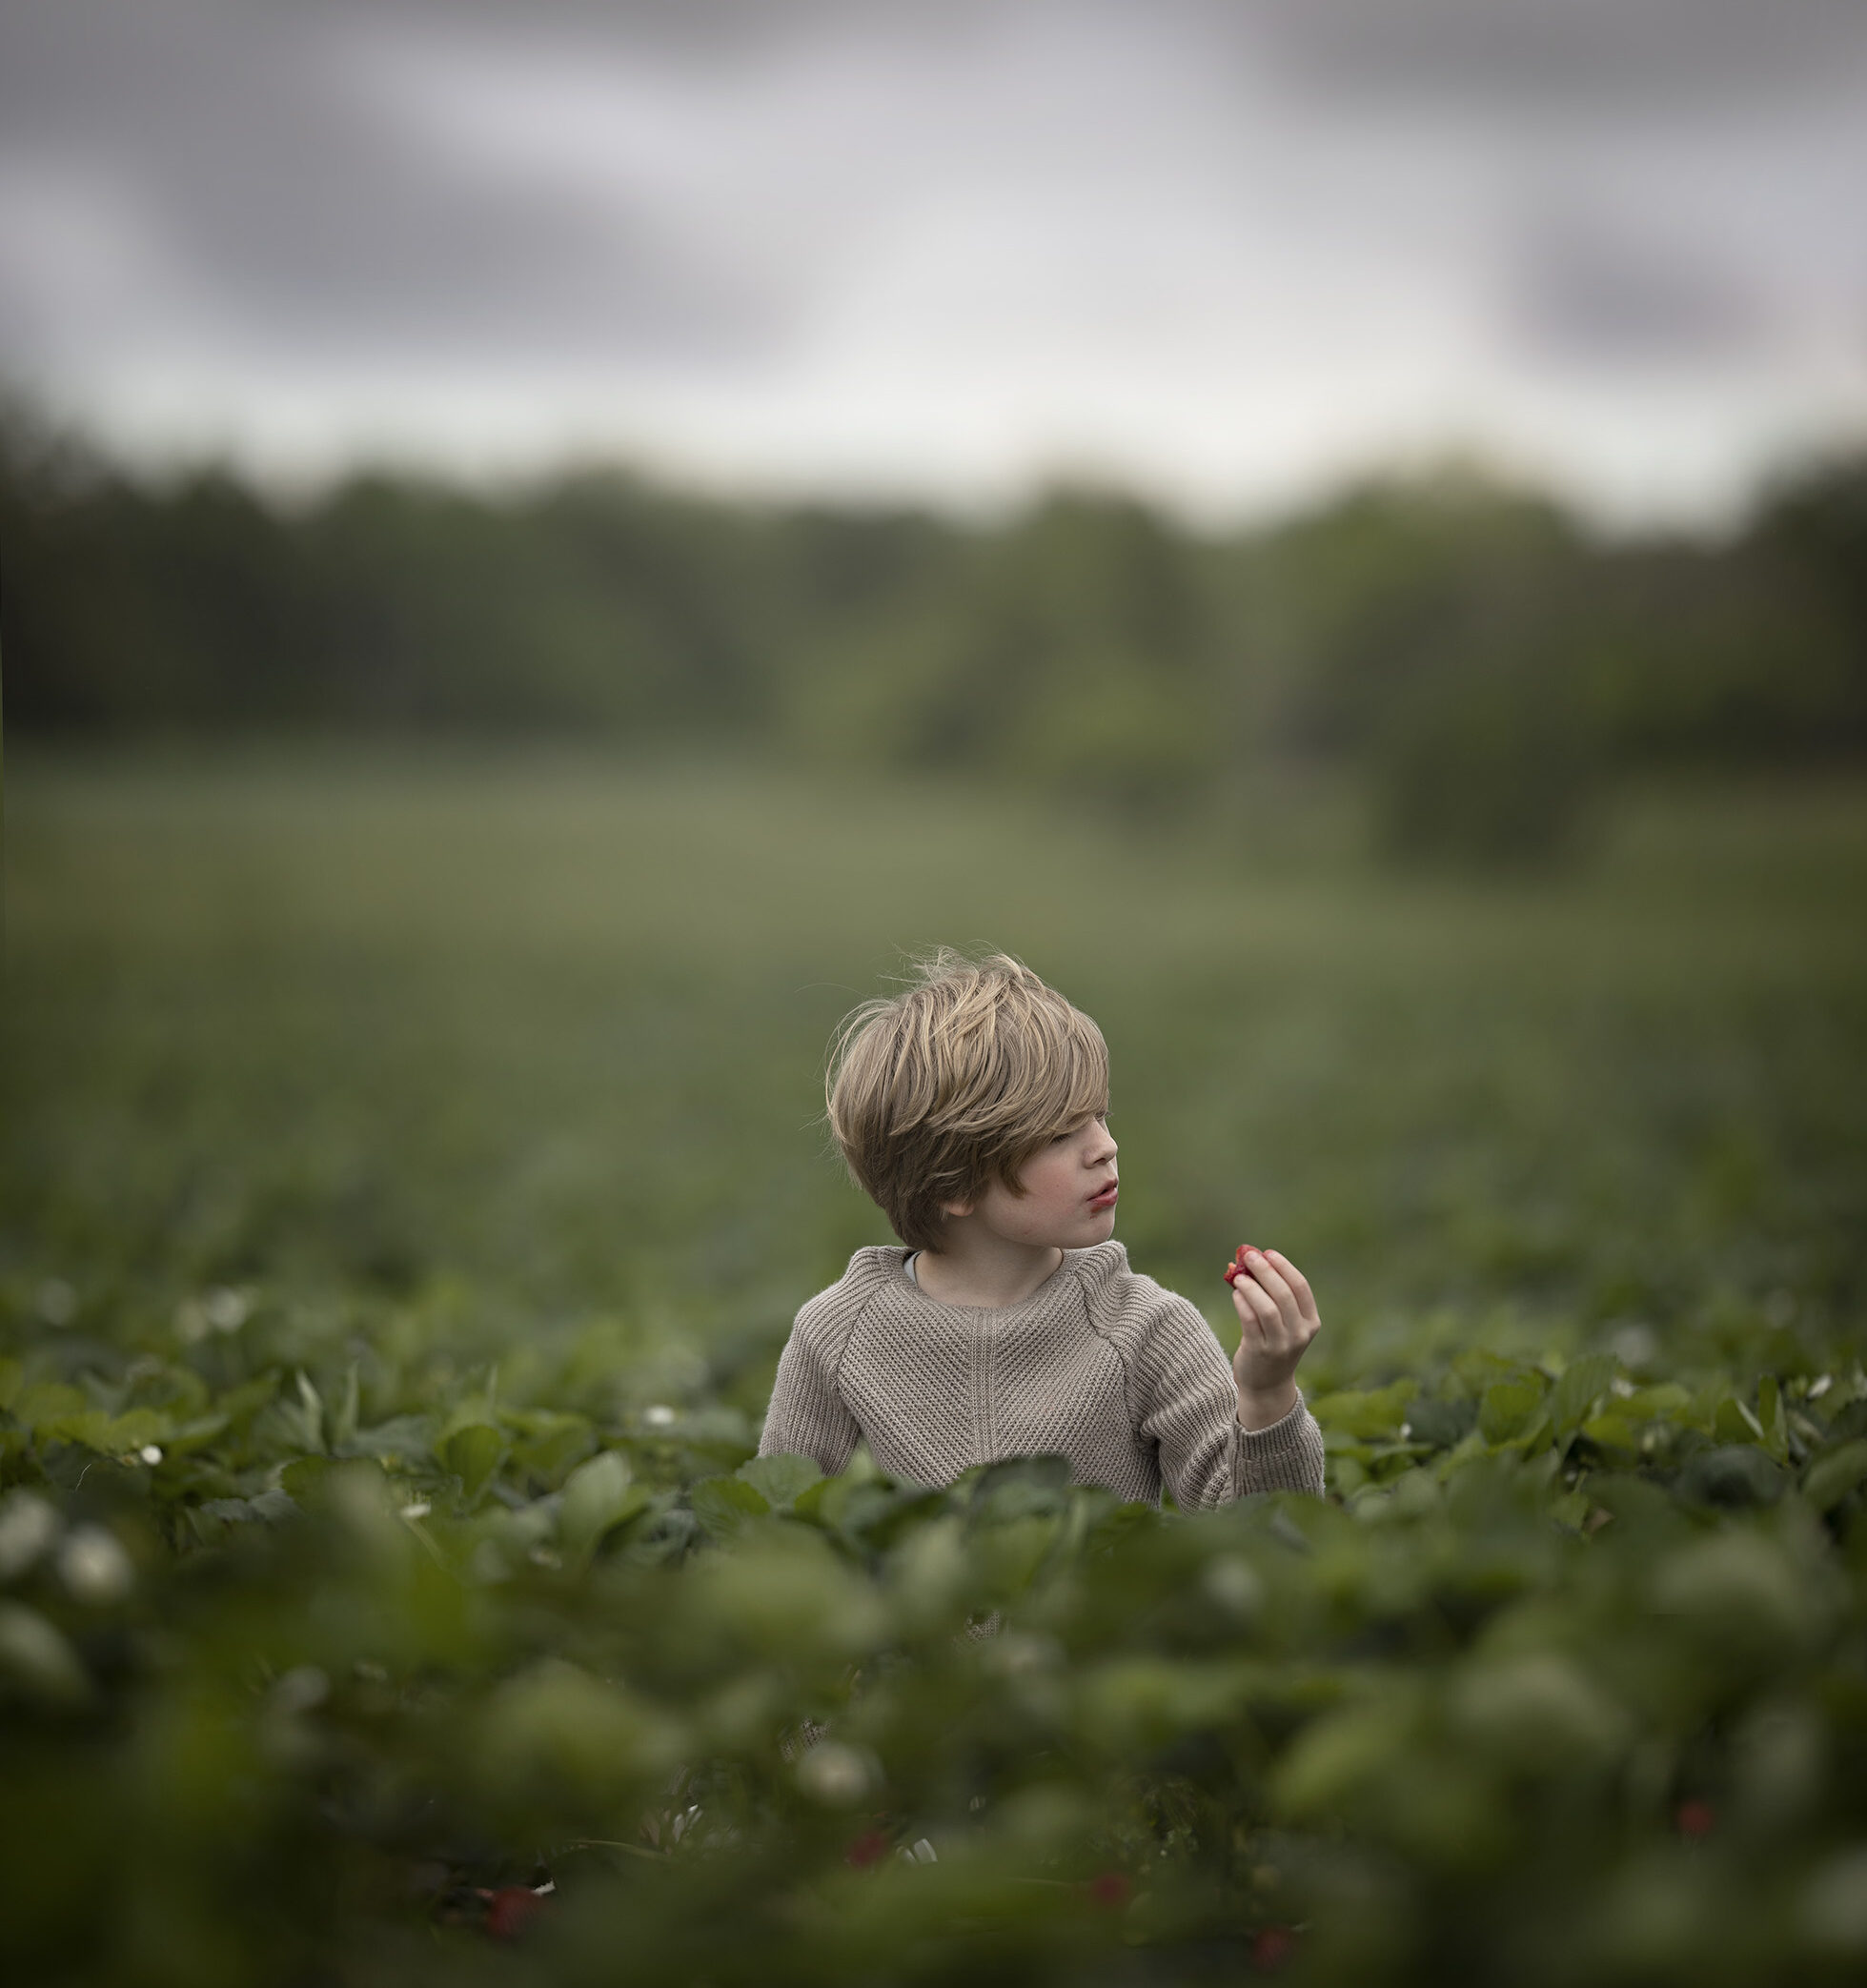 Berry picking photoshoot. Little boy sitting in strawberry field.